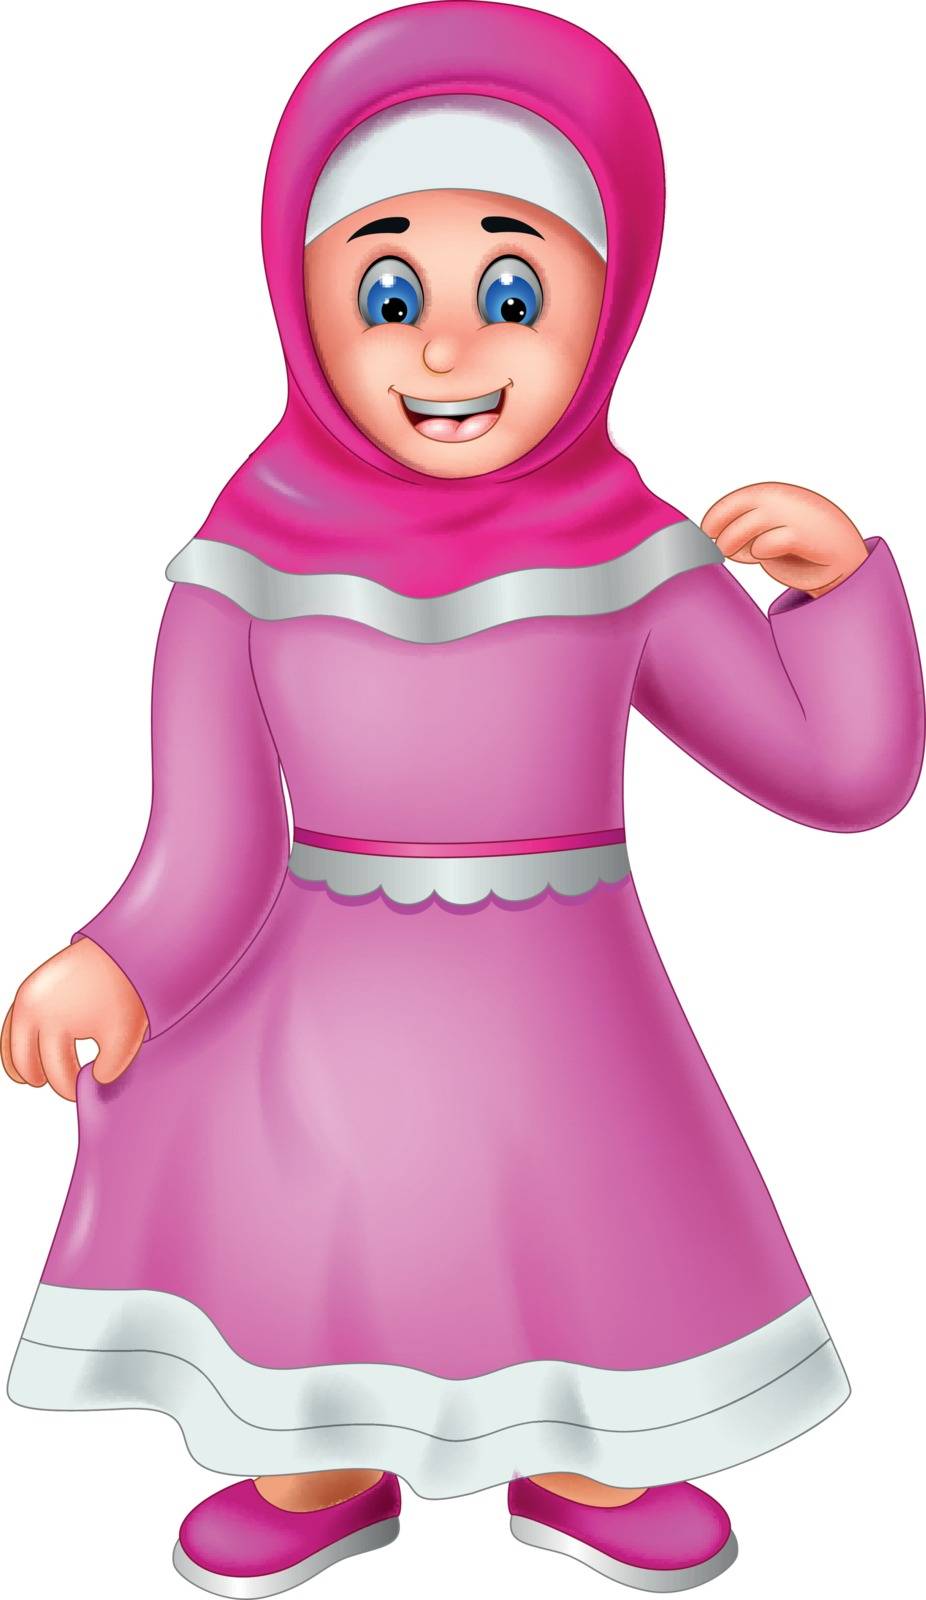 Beautiful Woman In Pink Dress and Pink Hijab Veil Cartoon for your design